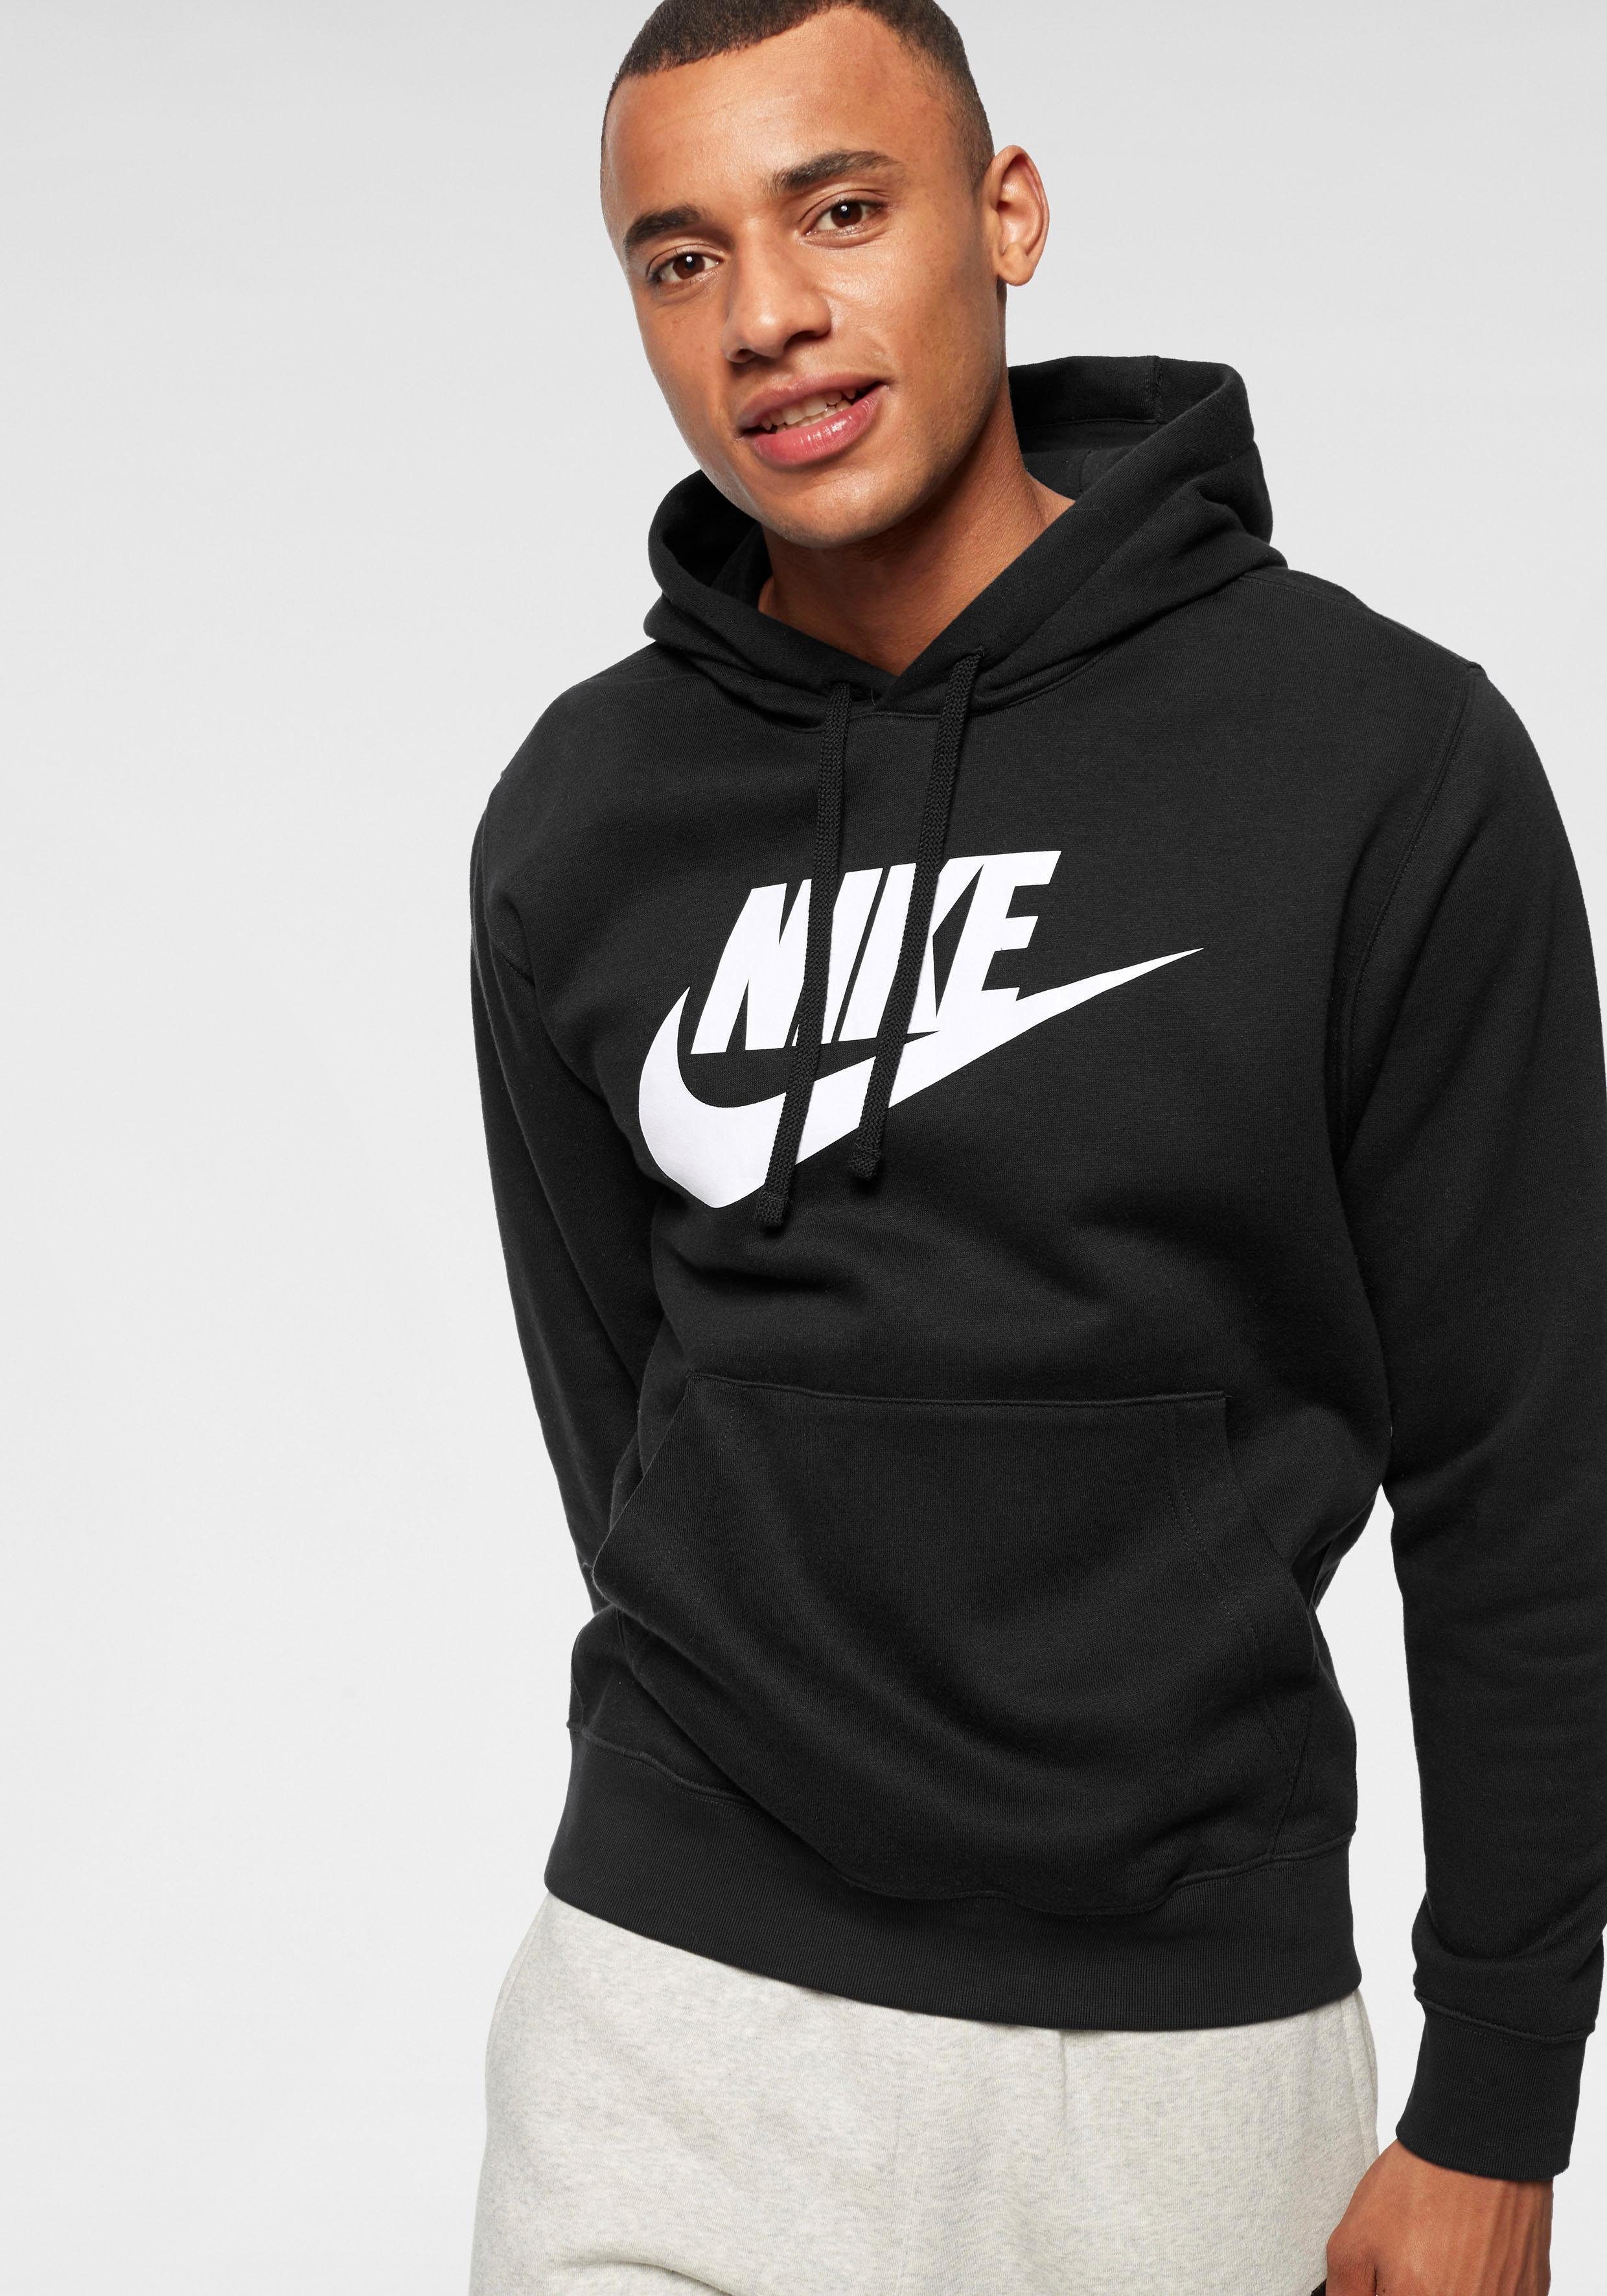 Both Defective grinning nike pulli otto curtain penance swing